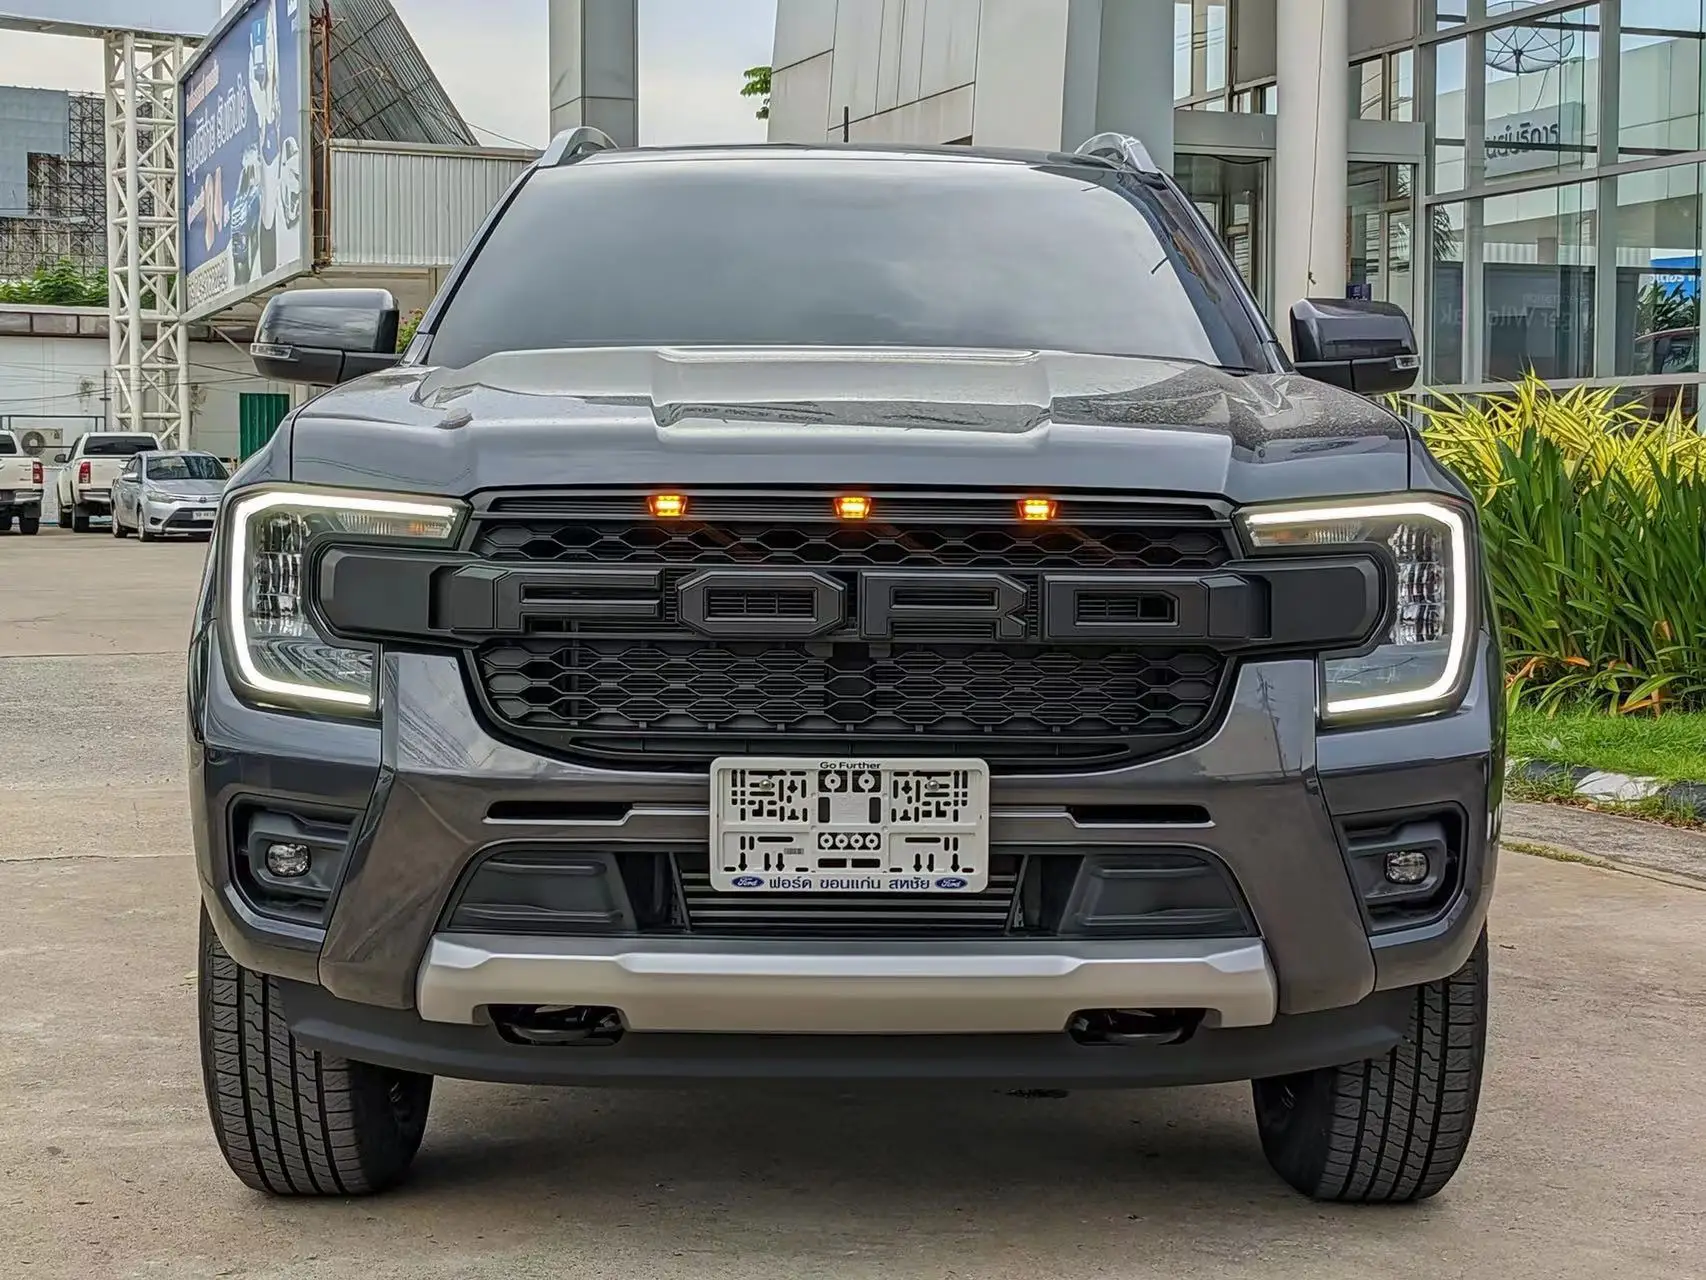 

NEW 2022 2023 Front Grill with Led For FORD RANGER Accessories T9 MK4 PX4 High Version XLT WILDTRAK SPORT